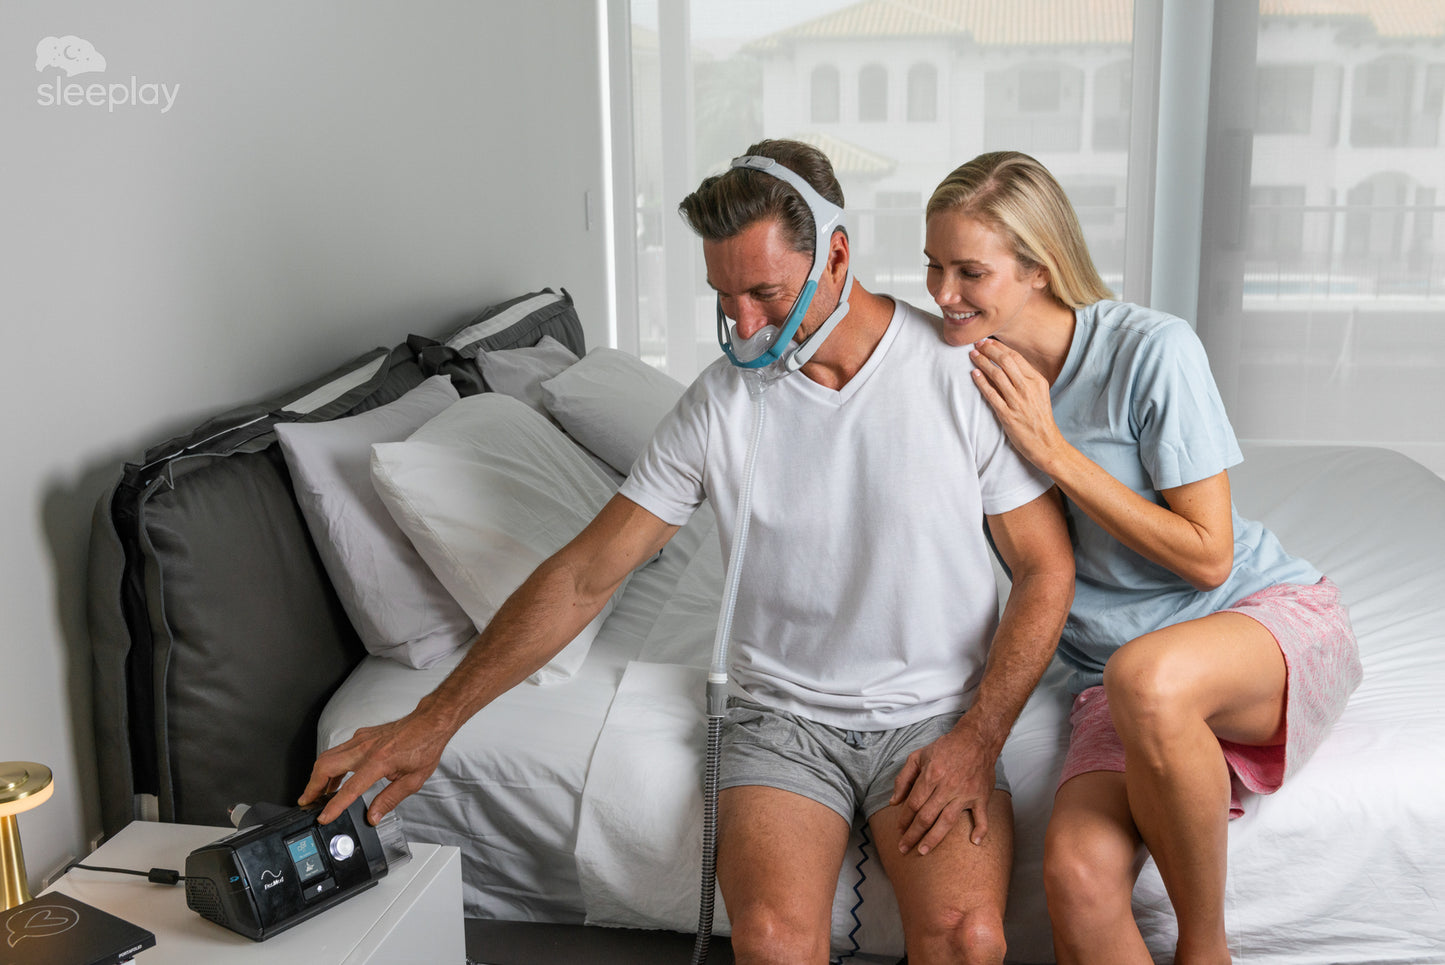 Using the AirSense 10 with Evora Full Face mask.